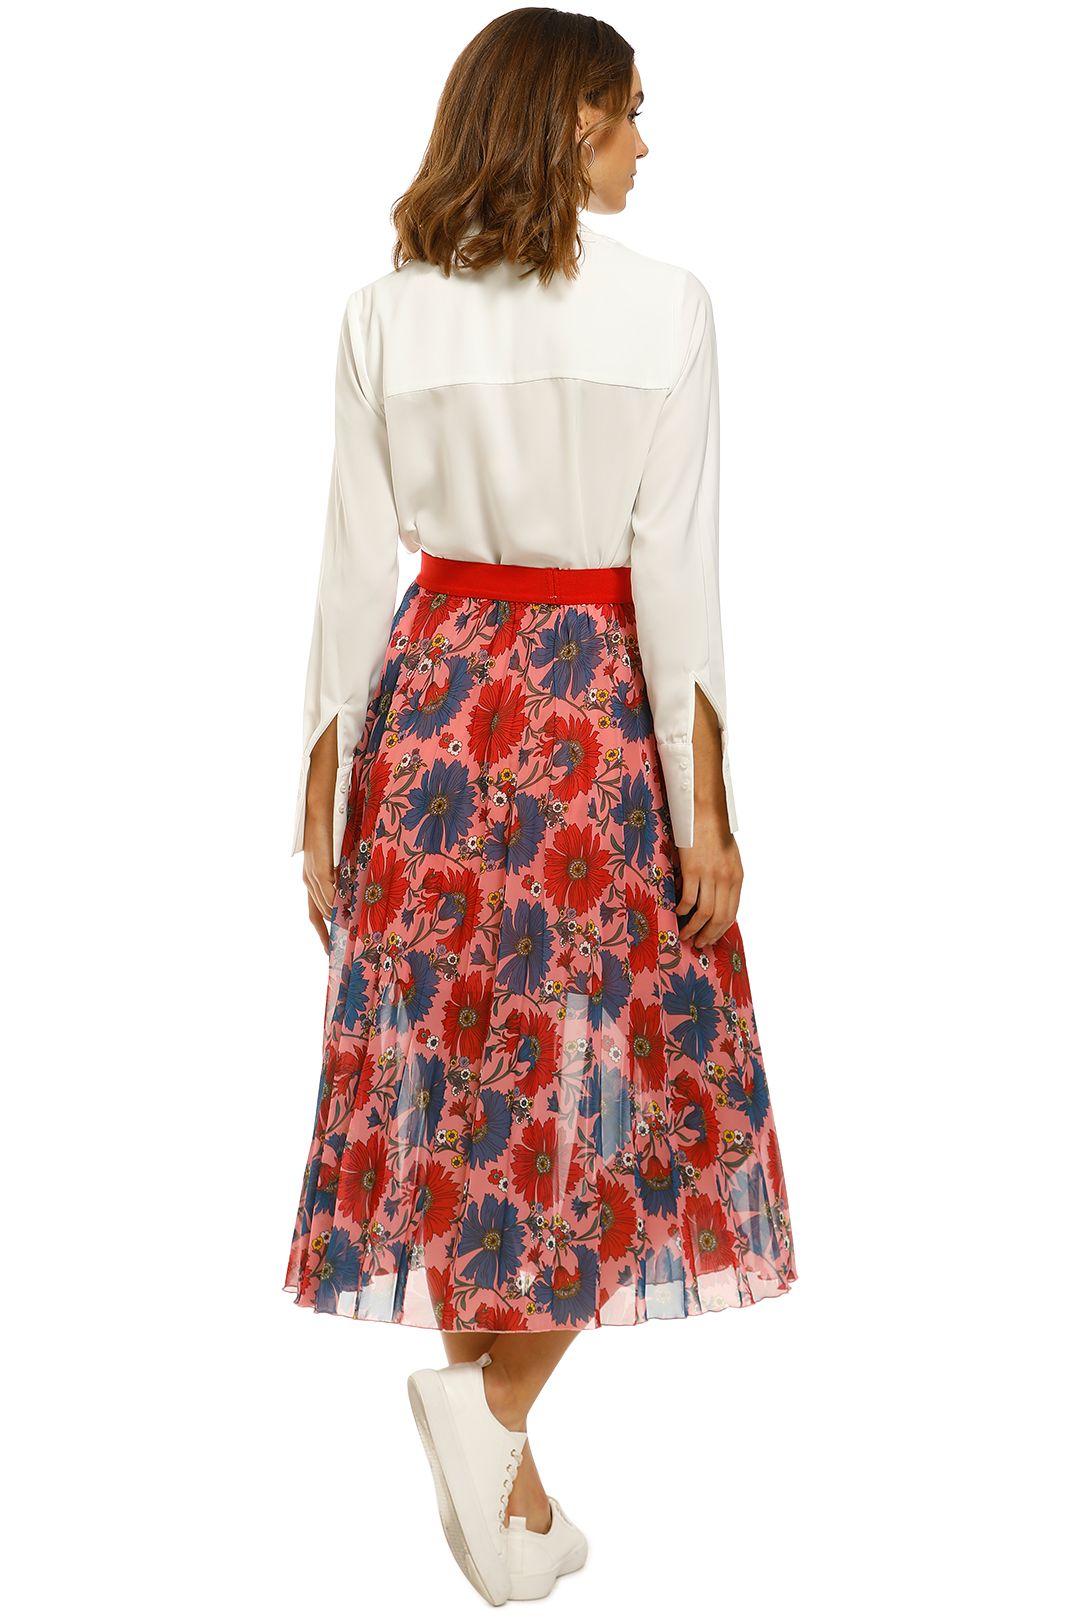 Curate-by-Trelise-Cooper-Side-Pleat-Skirt-Back